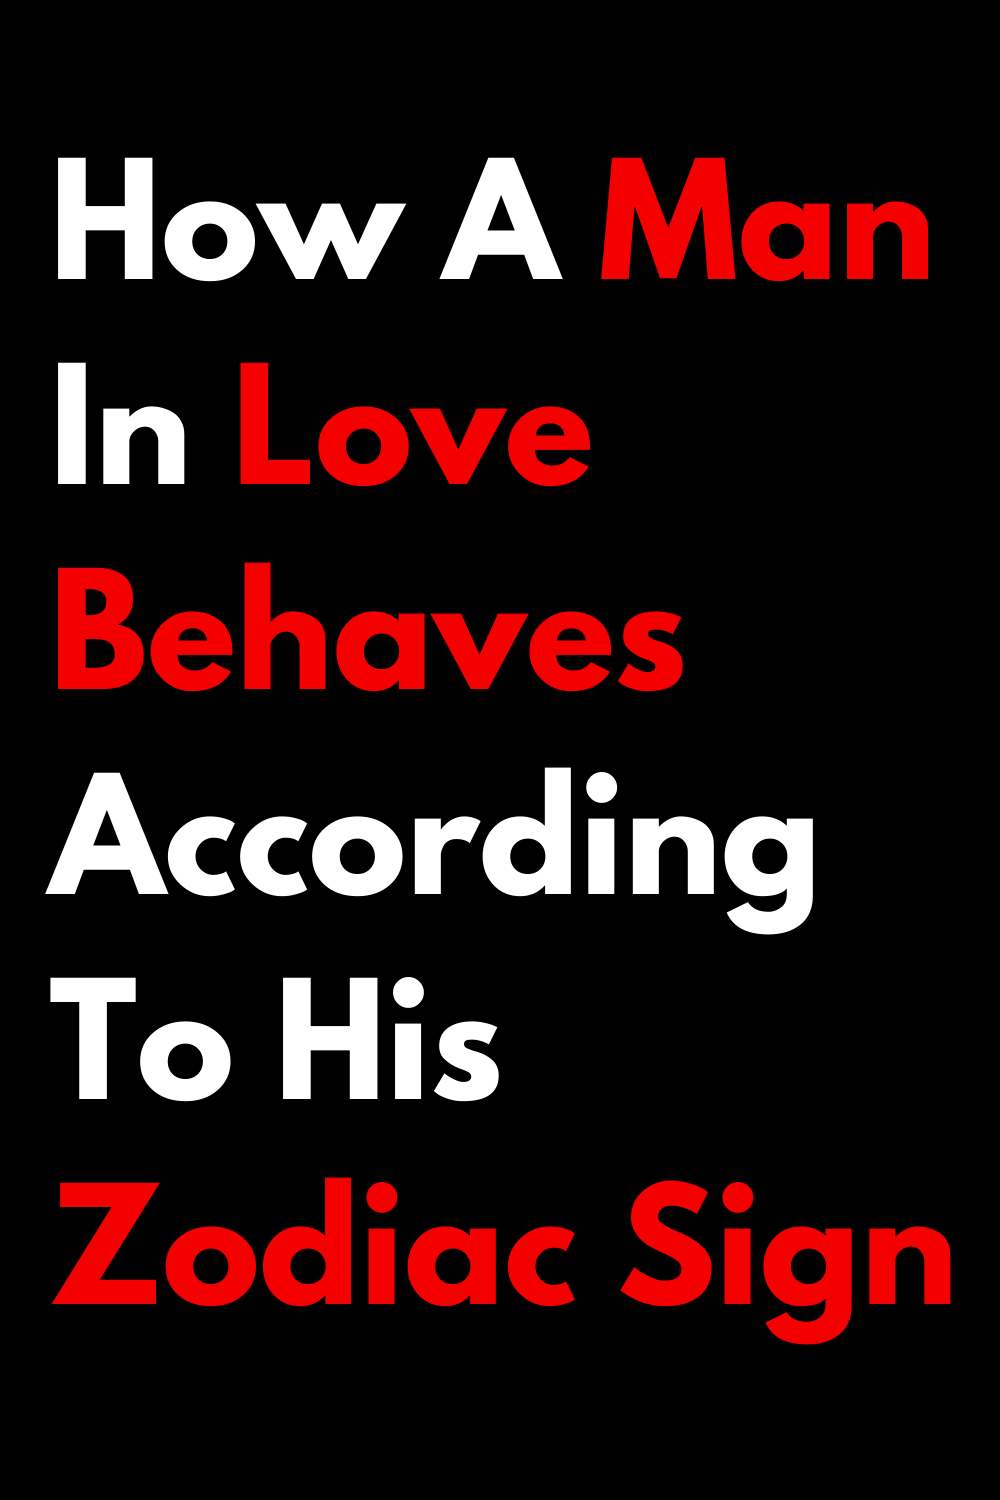 How A Man In Love Behaves According To His Zodiac Sign